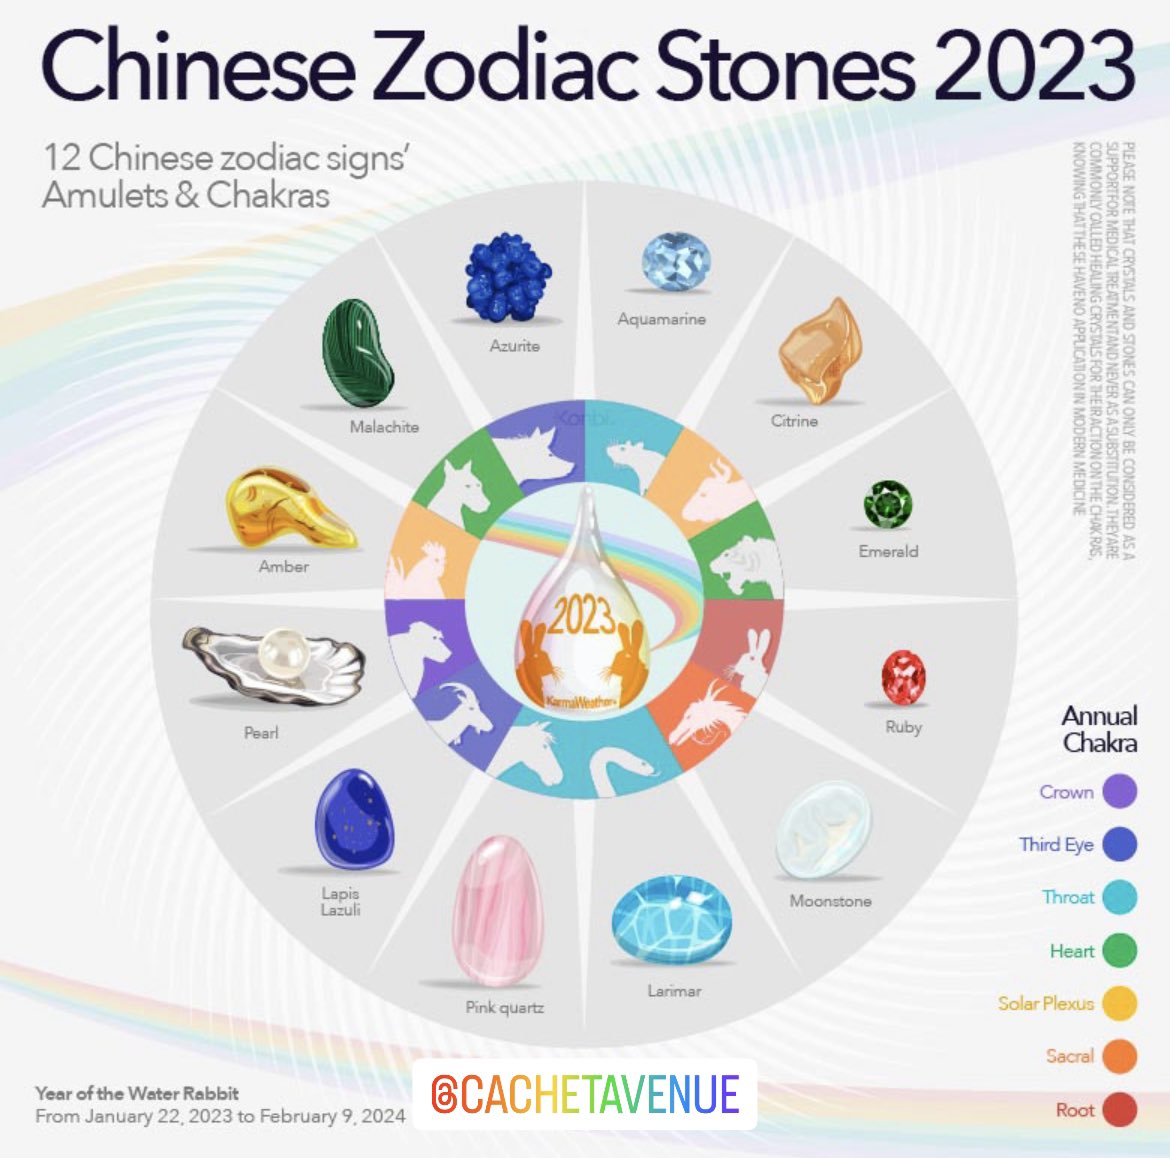 Positive energies with Cachet Avenue crystal stones based on Chinese Zodiac that are best for Year 2023!

#cachetavenue #crystals #best #for #year #2023 #water #rabbit #chinese #zodiac #crystalsg #crystalenergy #crystalshop #crystallovers #positivevibes #positiveenergy #singapore